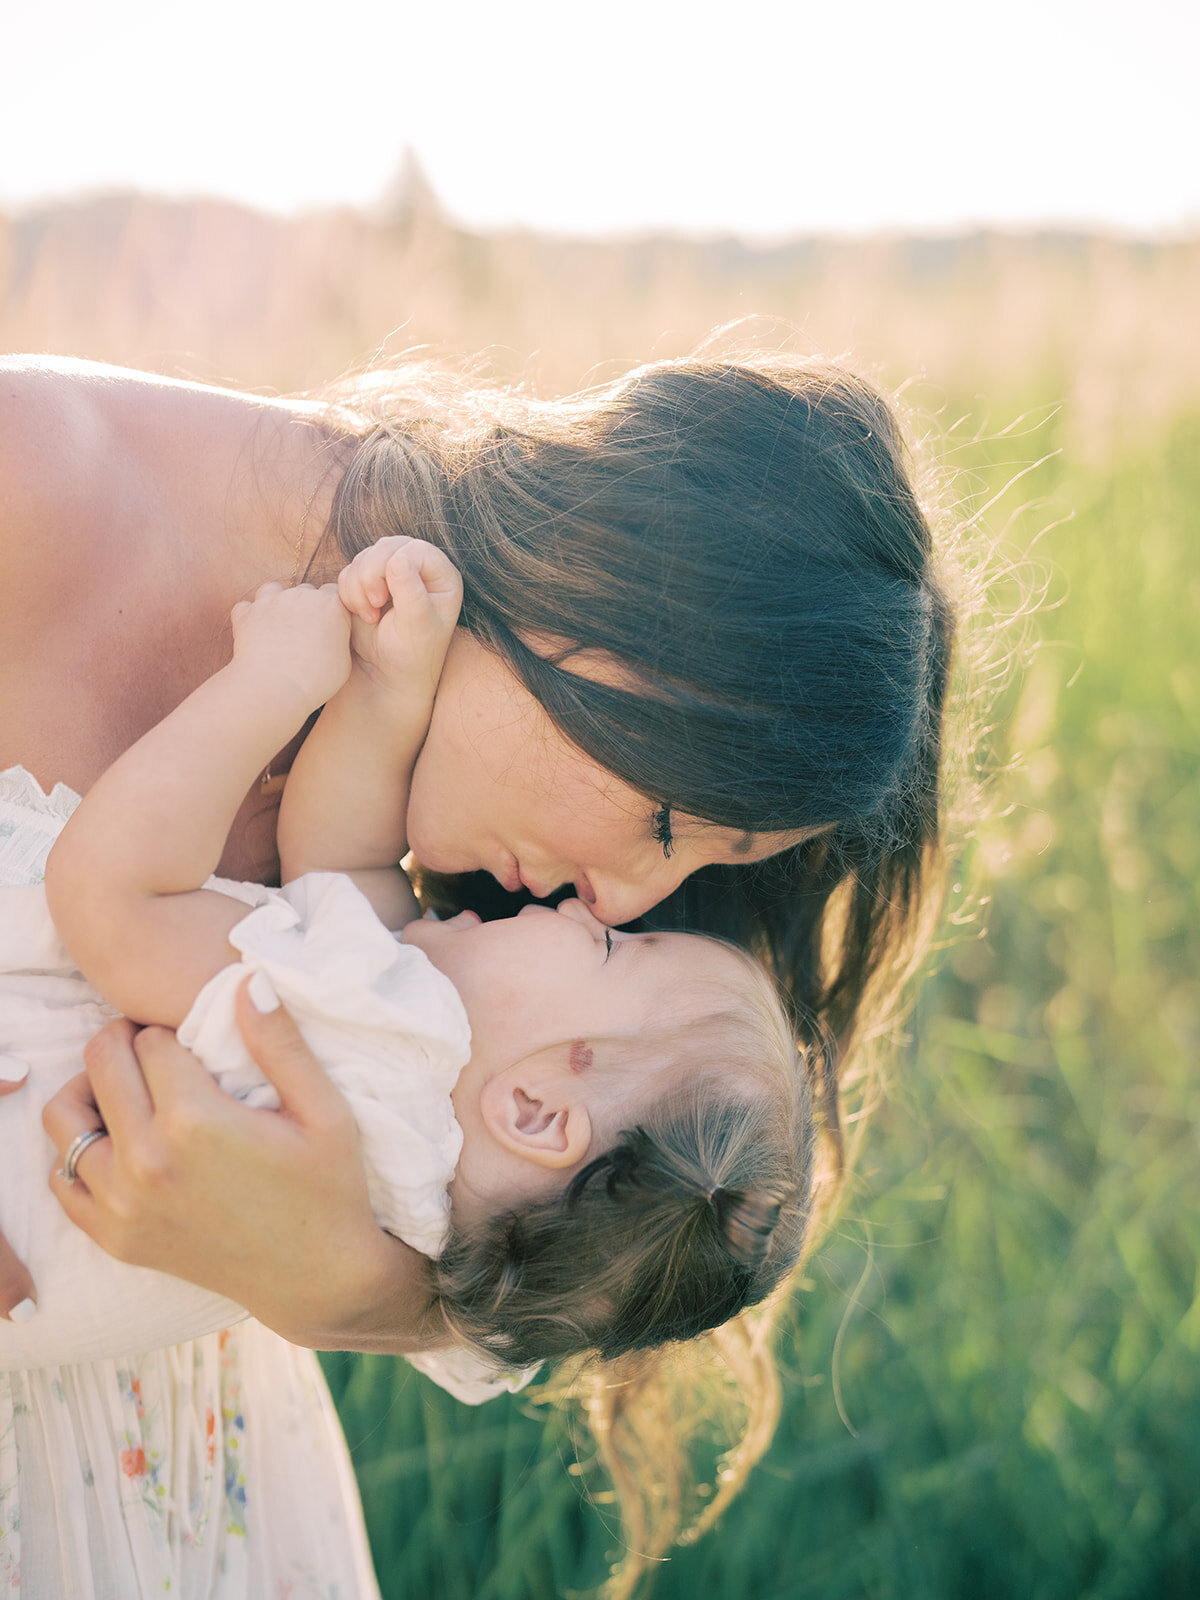 Mother leans down holding her toddler daughter in a grassy field at sunrise.